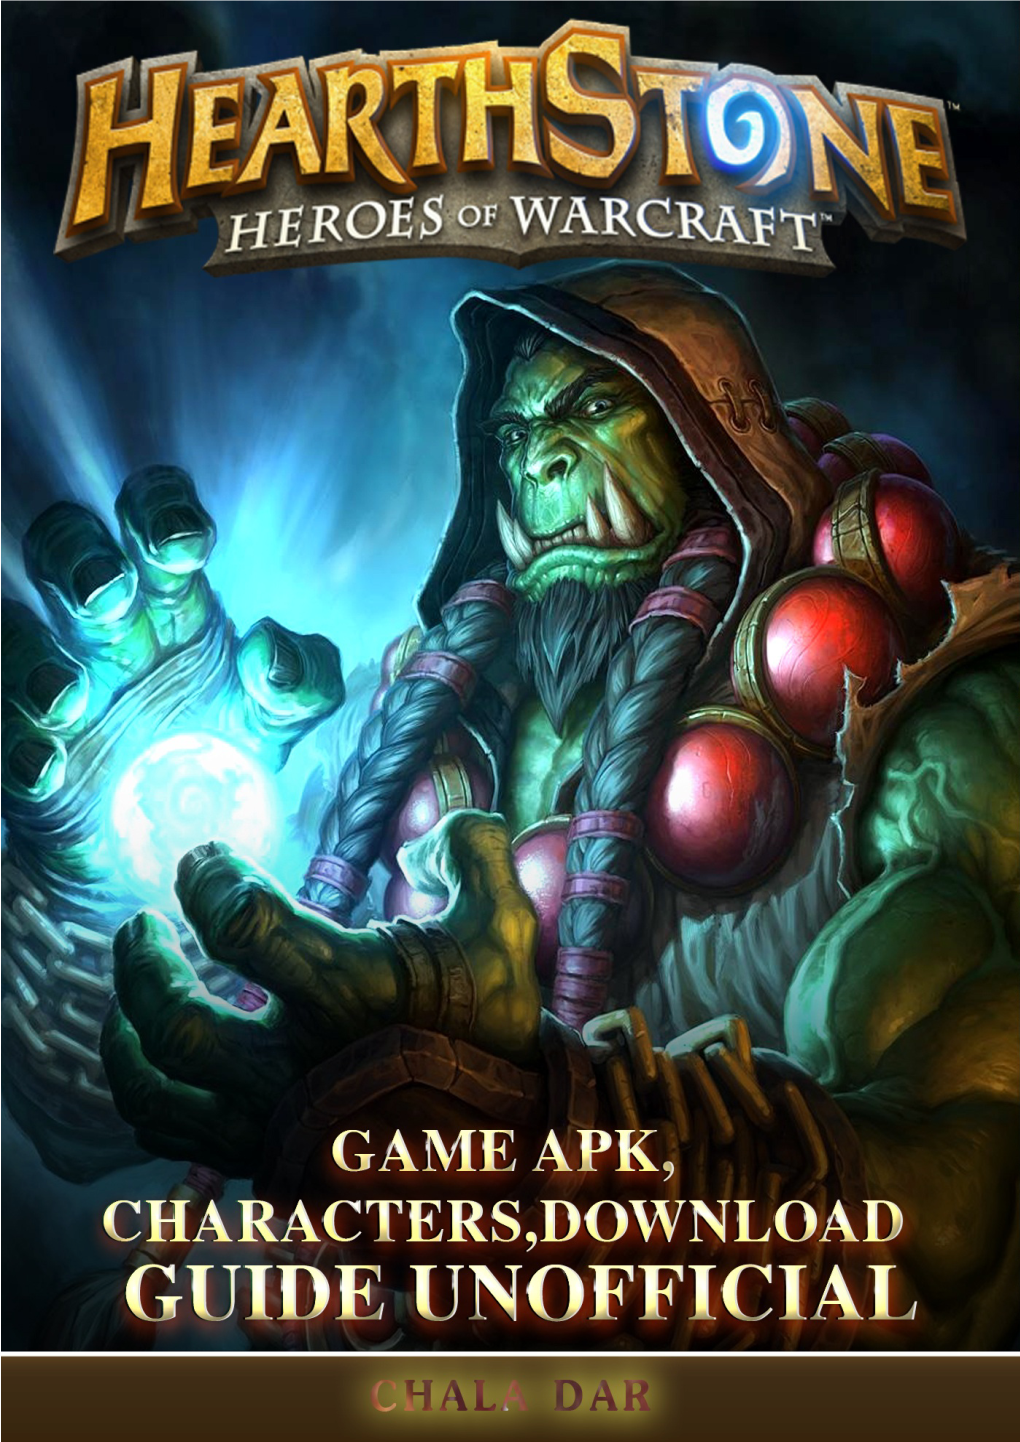 Hearthstone Heroes of Warcraft Game Apk, Characters, Download Guide Unofficial